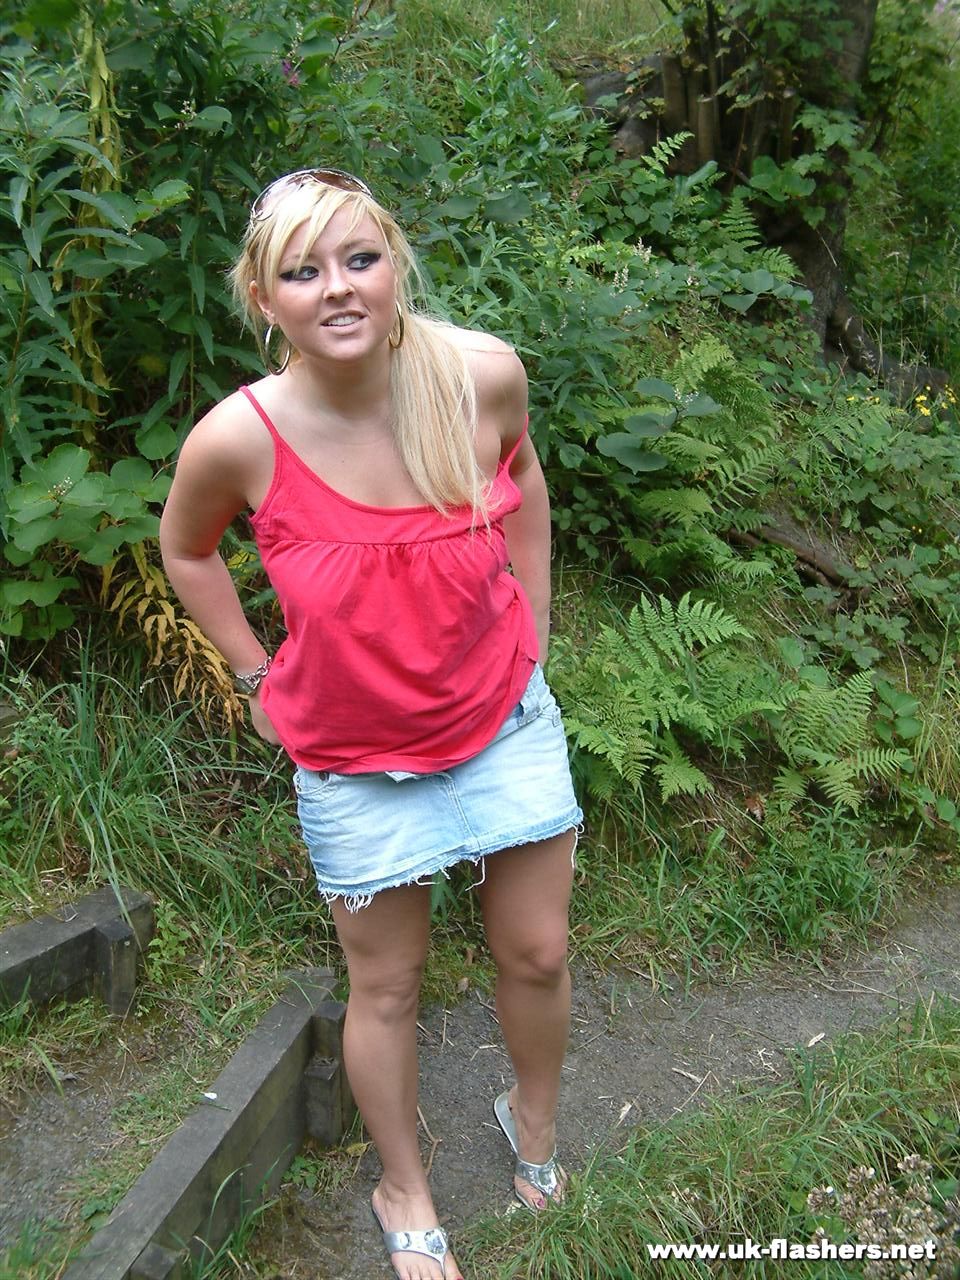 Overweight UK female with blonde hair strips naked on a popular walking trails foto porno #428197328 | UK Flashers Pics, Lena Leigh, Public, porno mobile